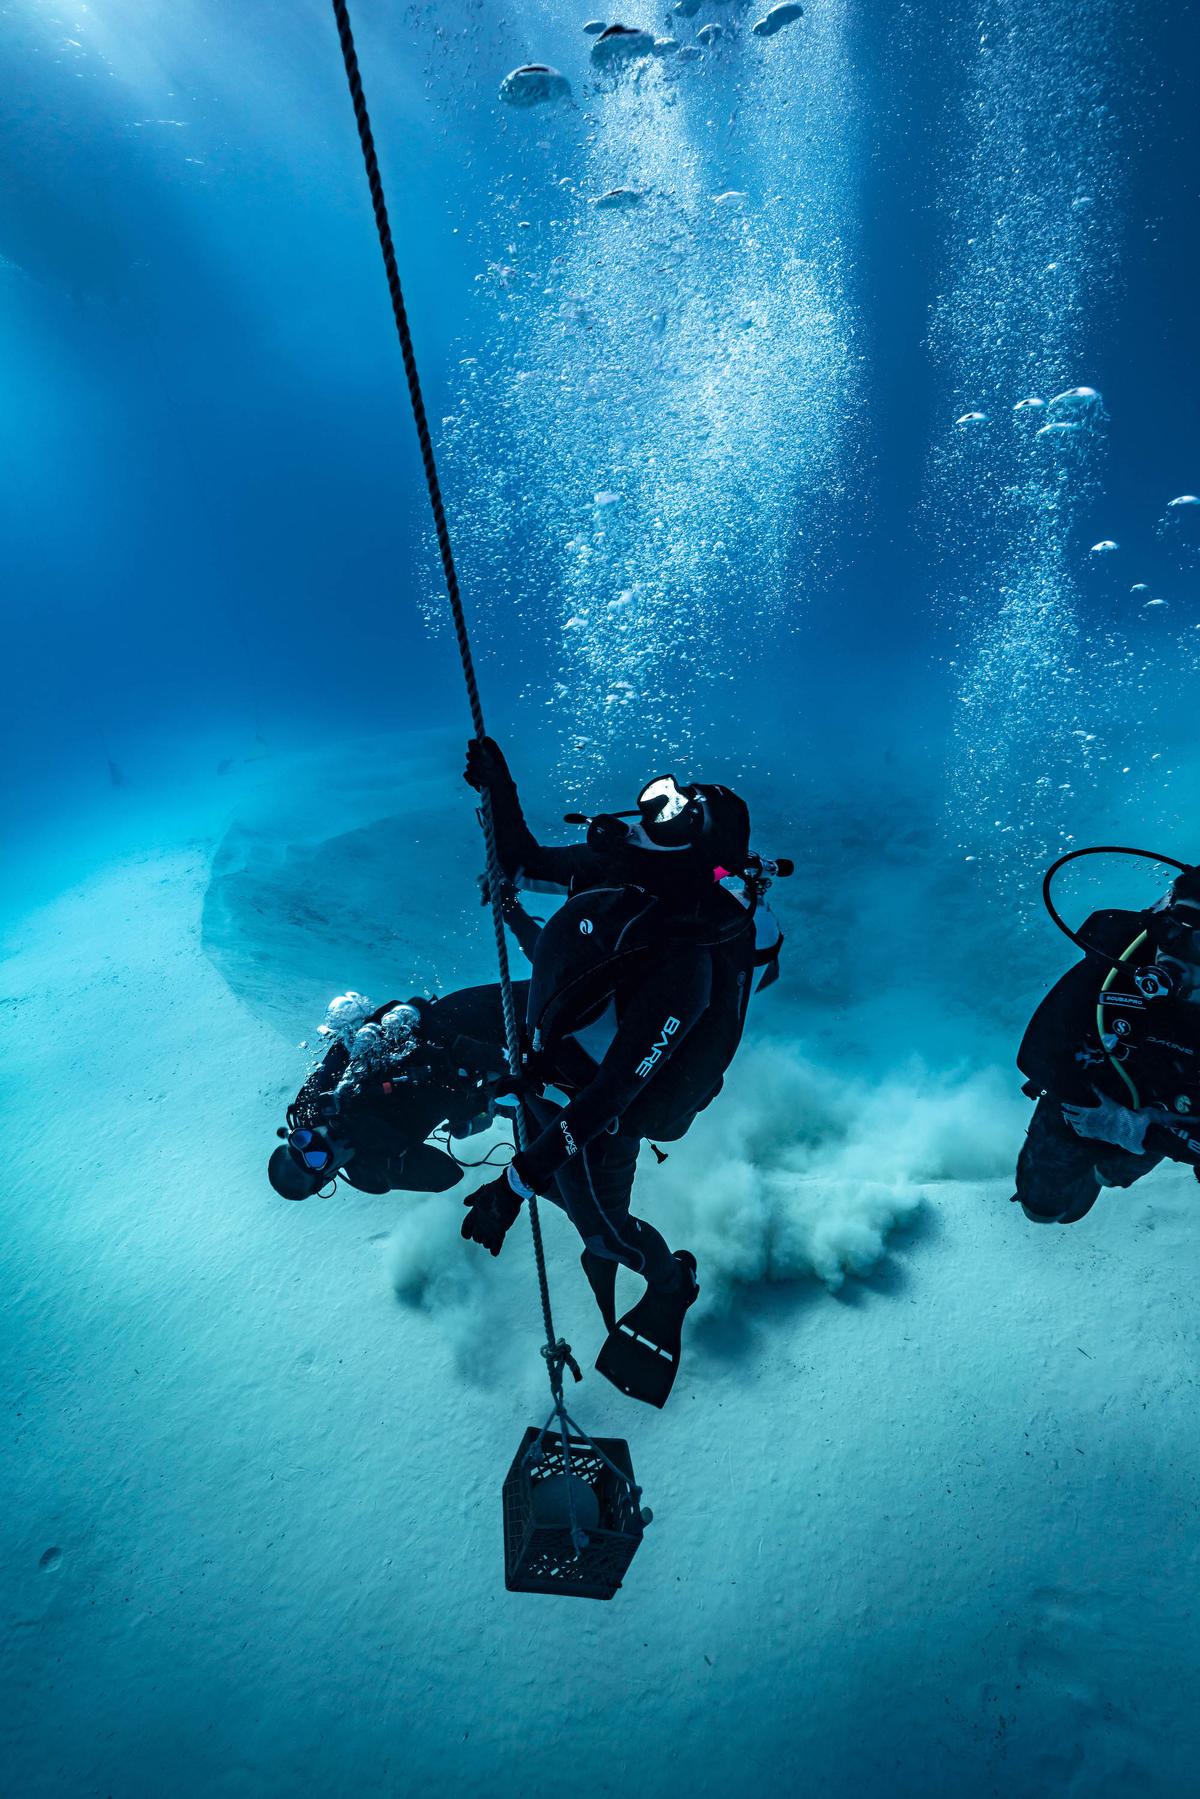 Divers returning to the surface after a search. (Courtesy of Chad Bagwell/Allen Exploration via <a href="https://www.bahamasmaritimemuseum.com/">Bahamas Maritime Museum</a>).